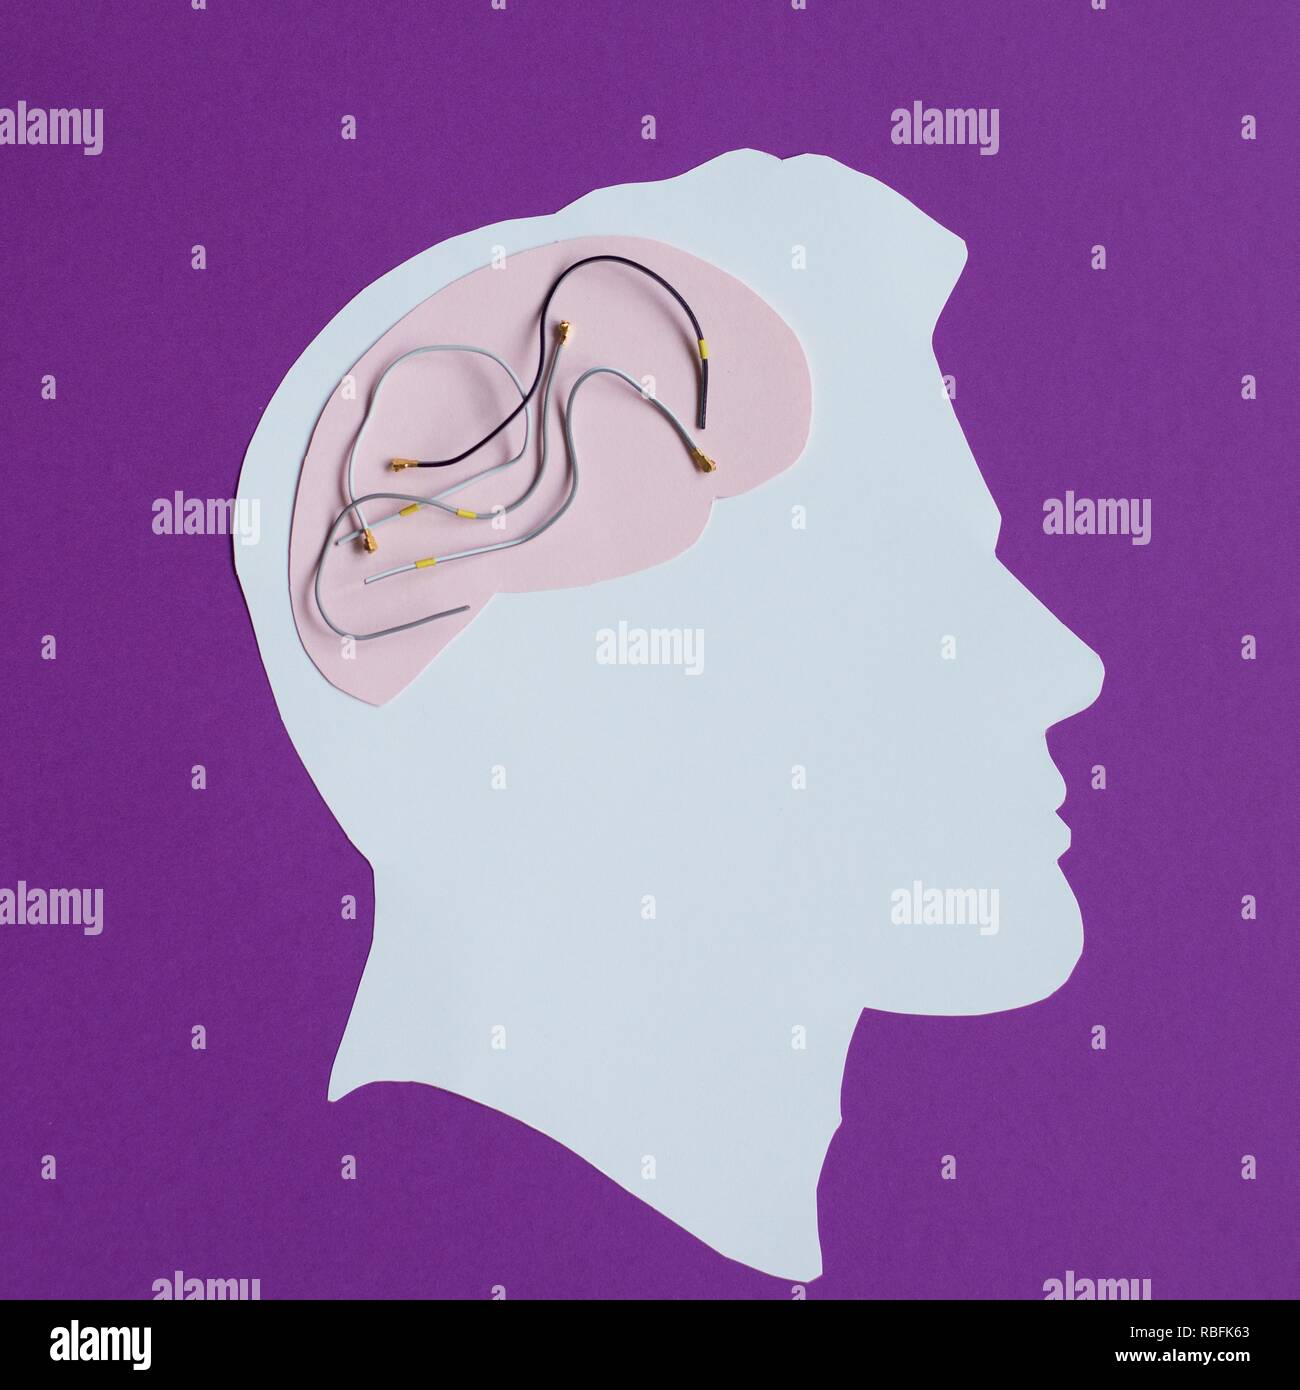 Cut paper and wires to represent the brain and technology. Stock Photo